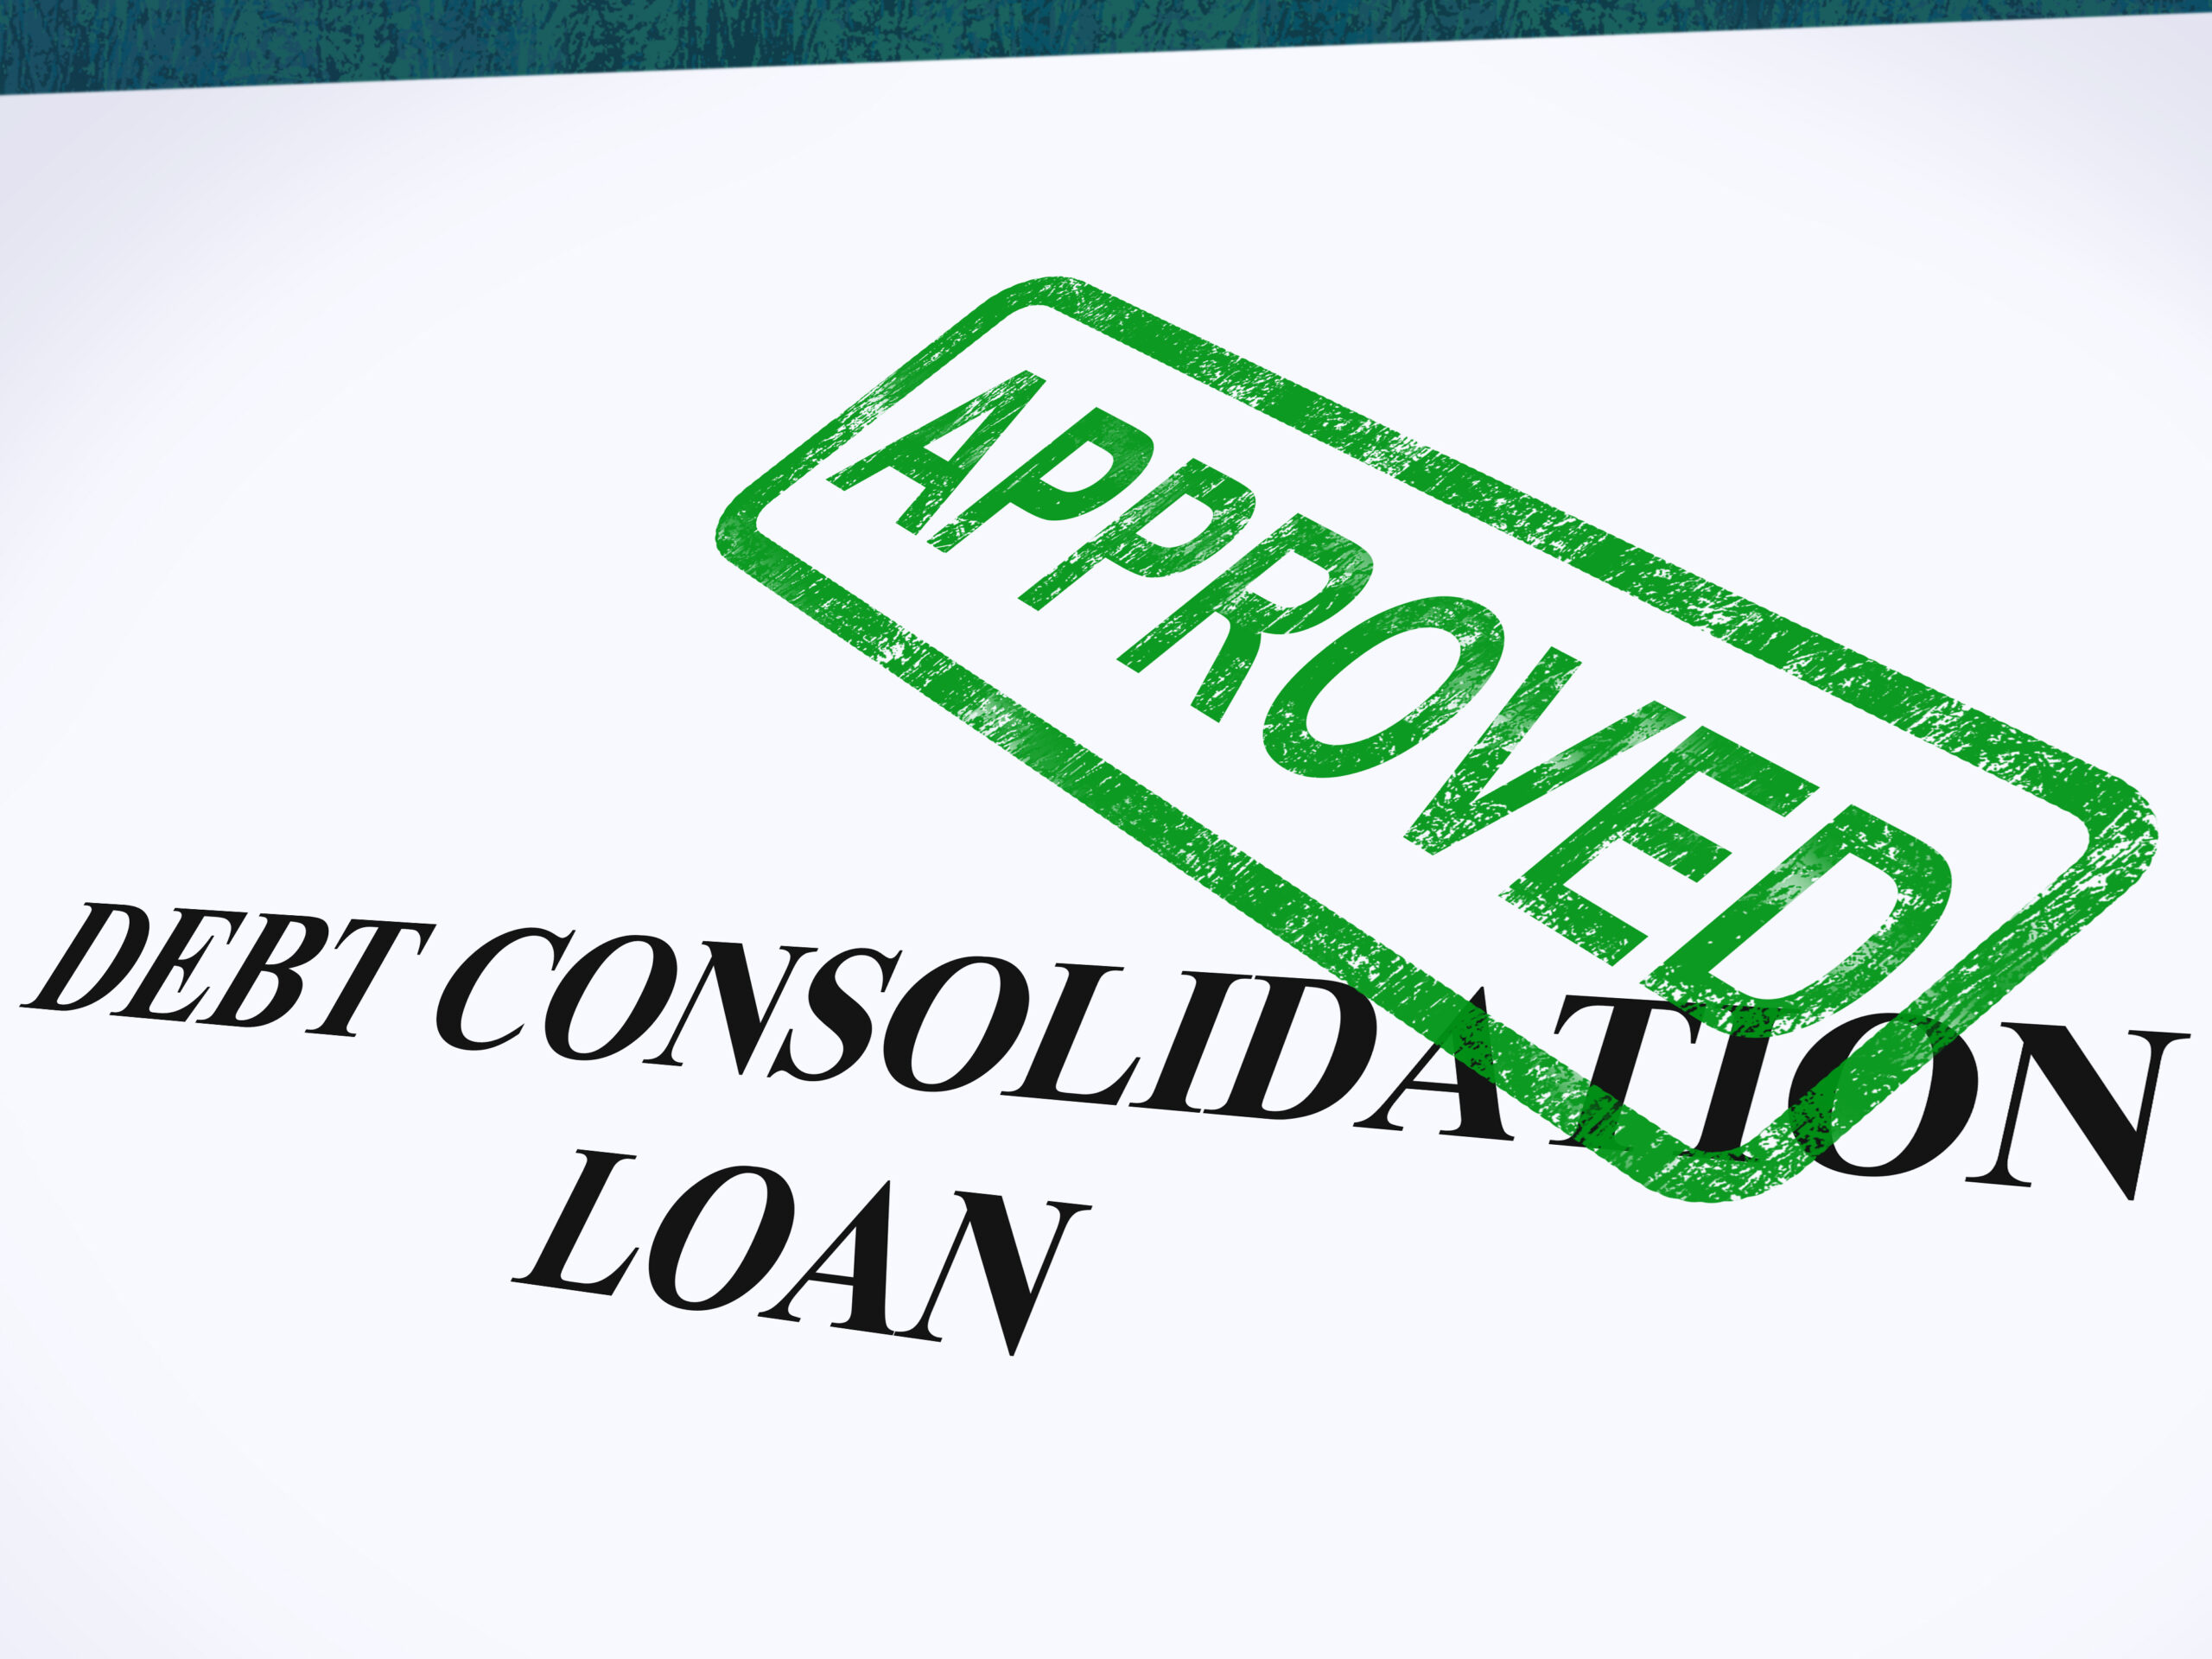 debt consolidation loan approved stamp